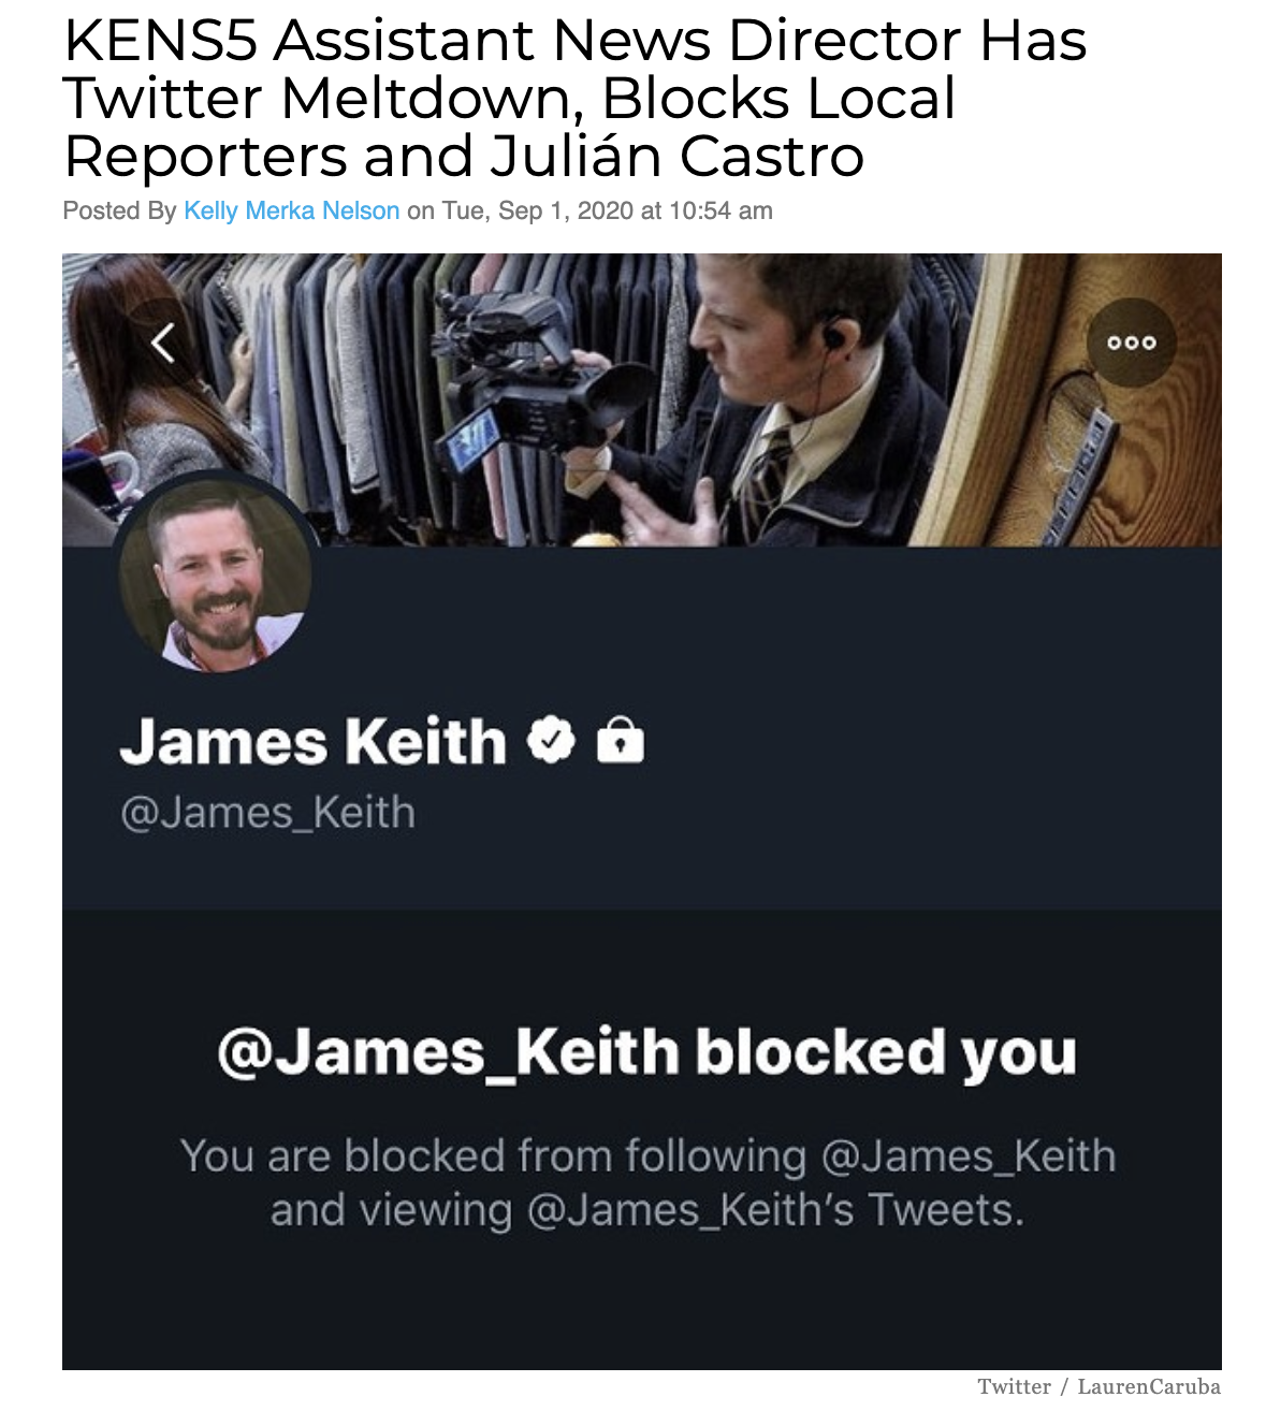 KENS5 Assistant News Director James Keith went on a Twitter blocking spree this weekend after criticism from local reporters and former San Antonio mayor Julián Castro over how the station handled issues of race in a recent story. Read more here.